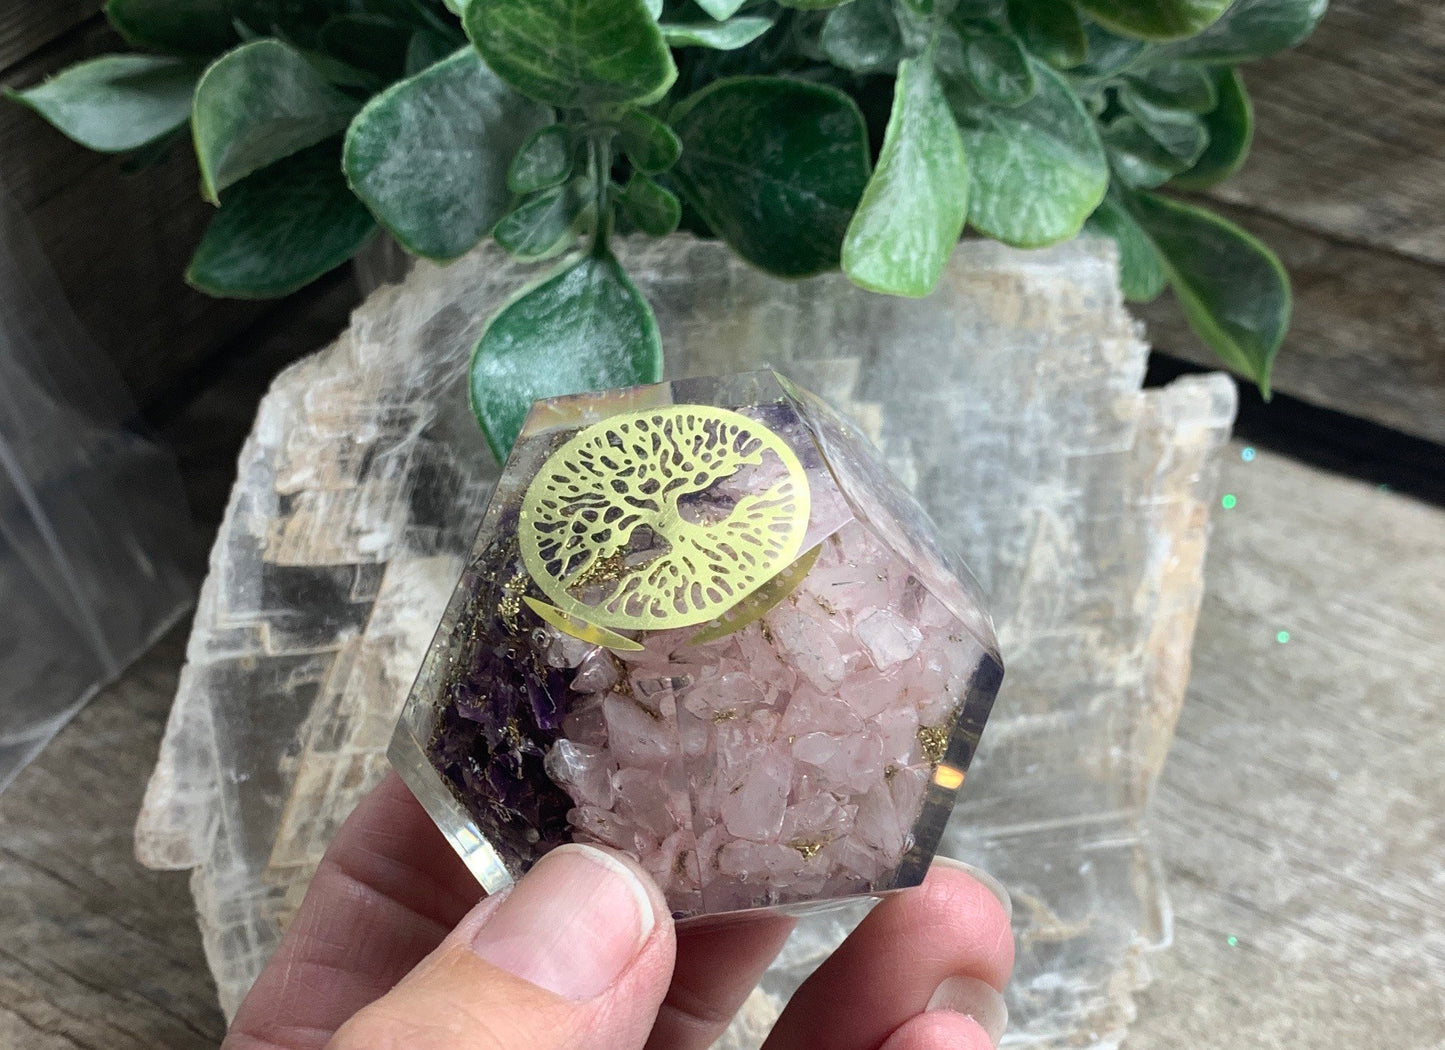 Tree Of Life Orgonite Dodecahedron Clear Quartz, Rose Quartz, Amethyst ORG-0022 (Crystals Imbedded in Resin)